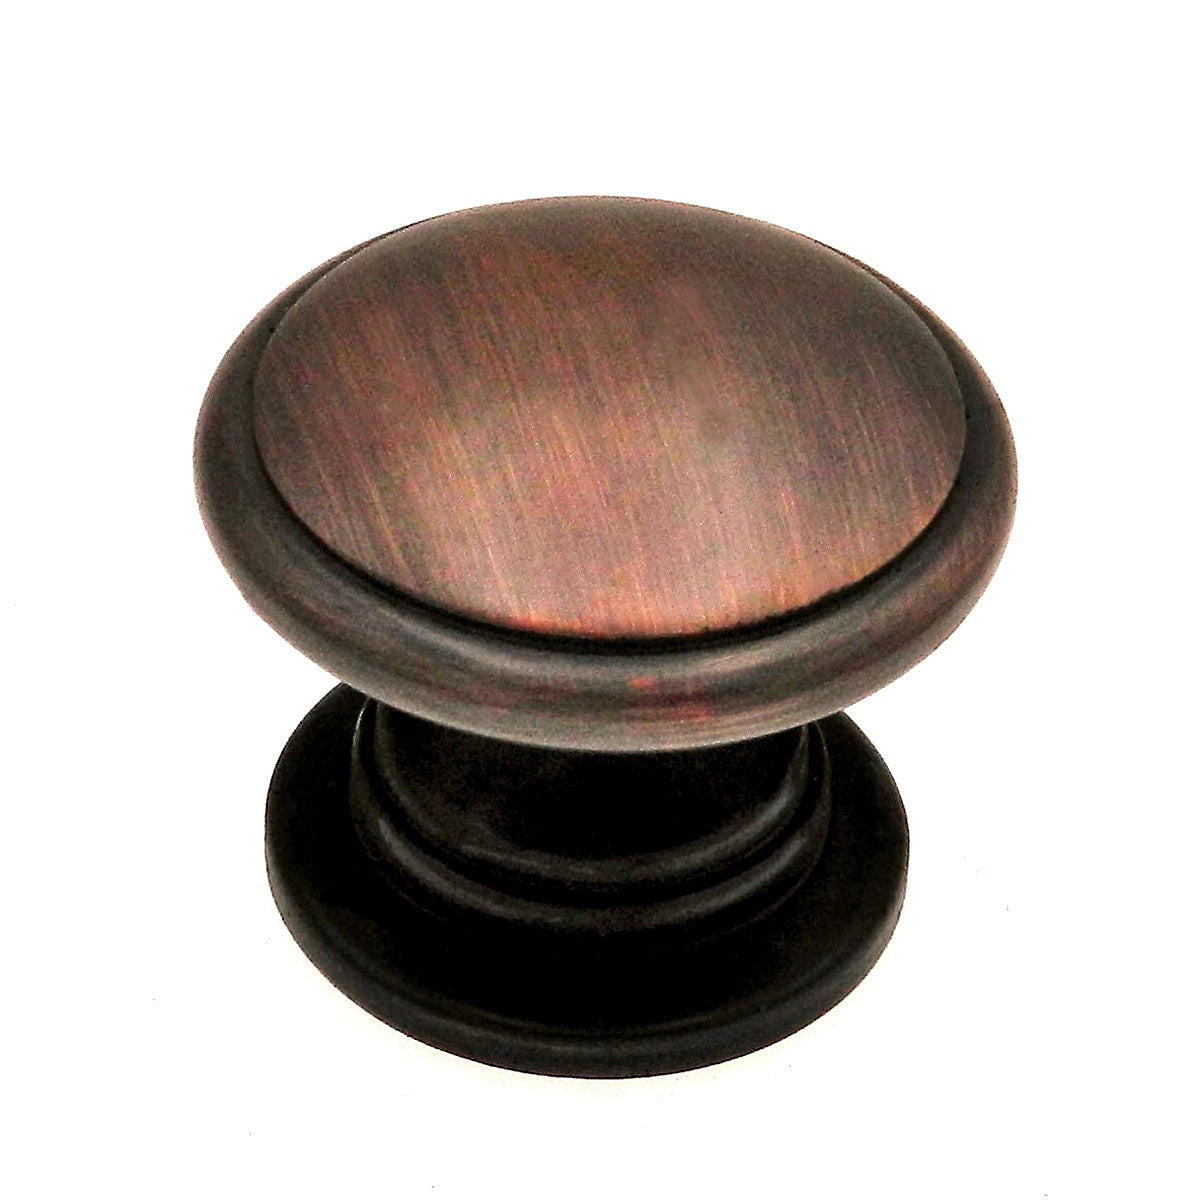 Warwick Traditional Oil-Rubbed Bronze 1 1/4" Elegant Cabinet Knob Pull DH1002BZ